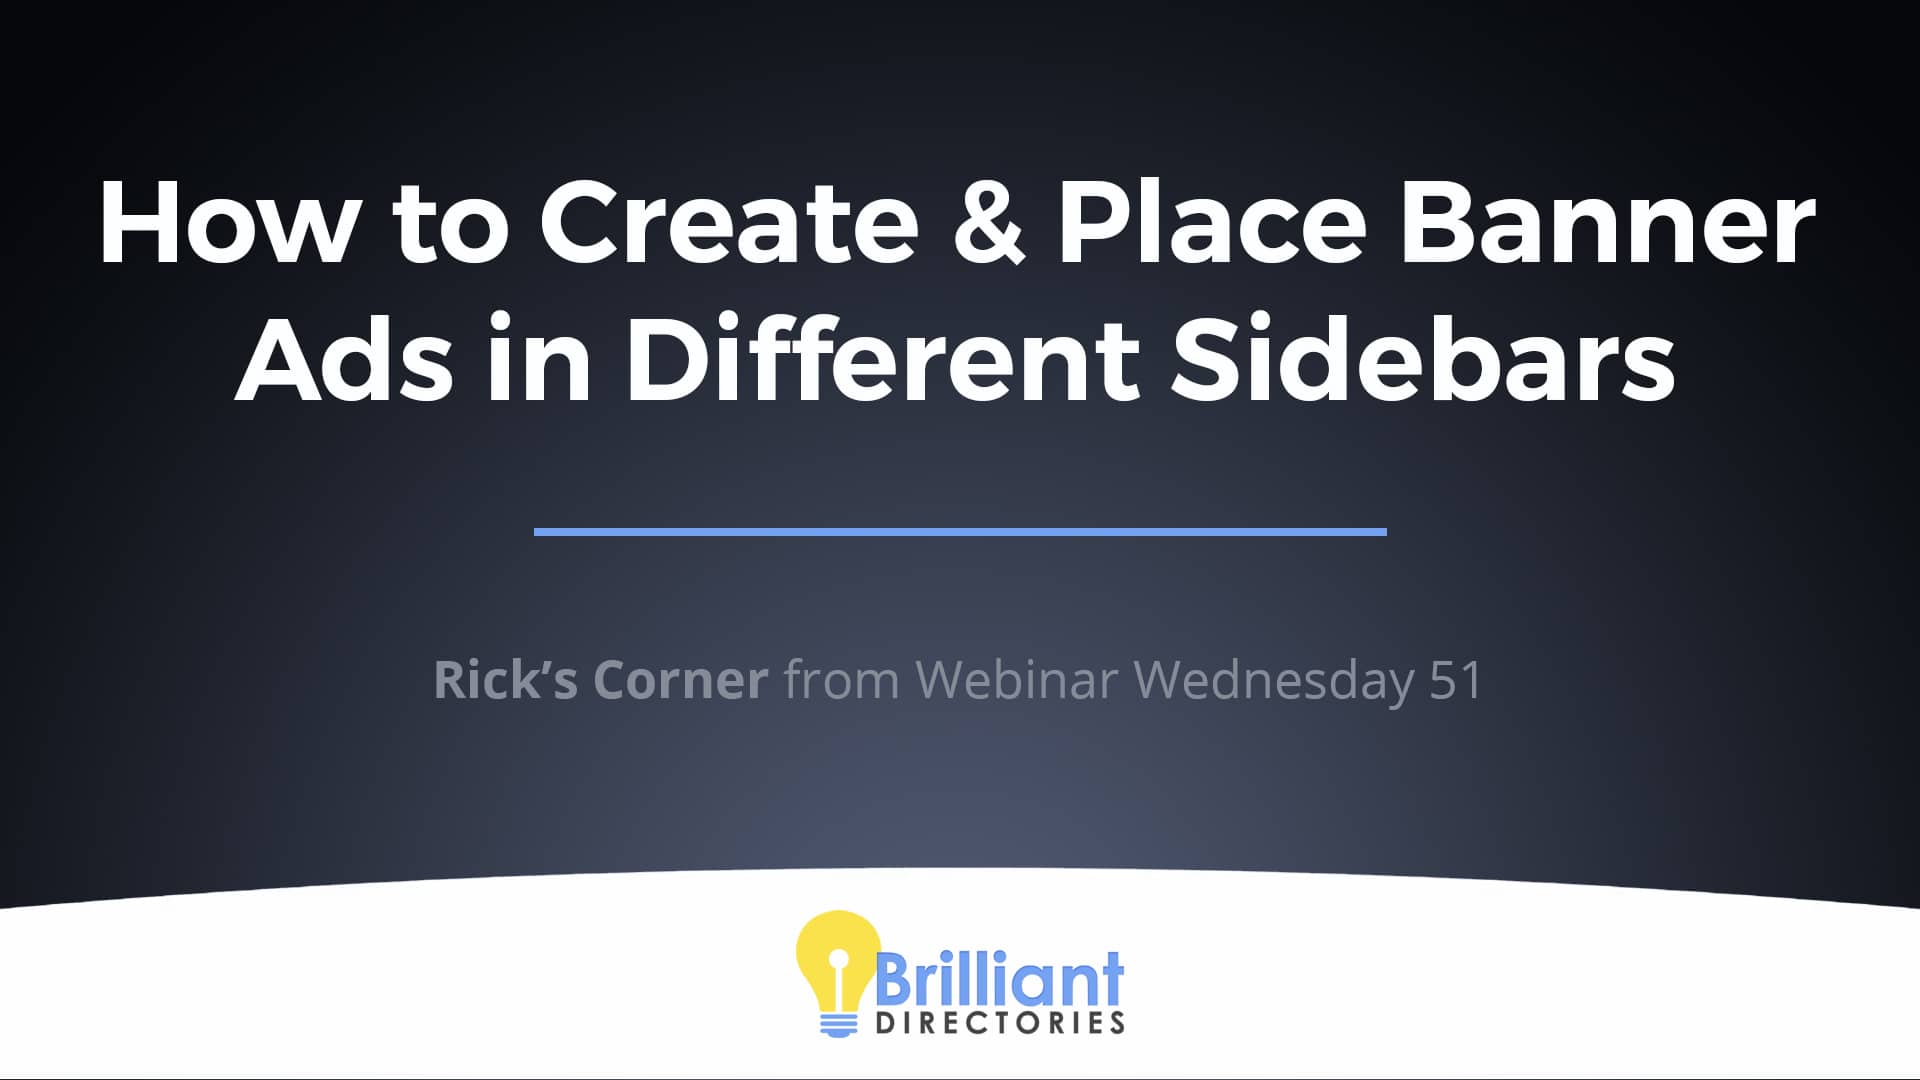 How to Create & Place Banner Ads in Different Sidebars